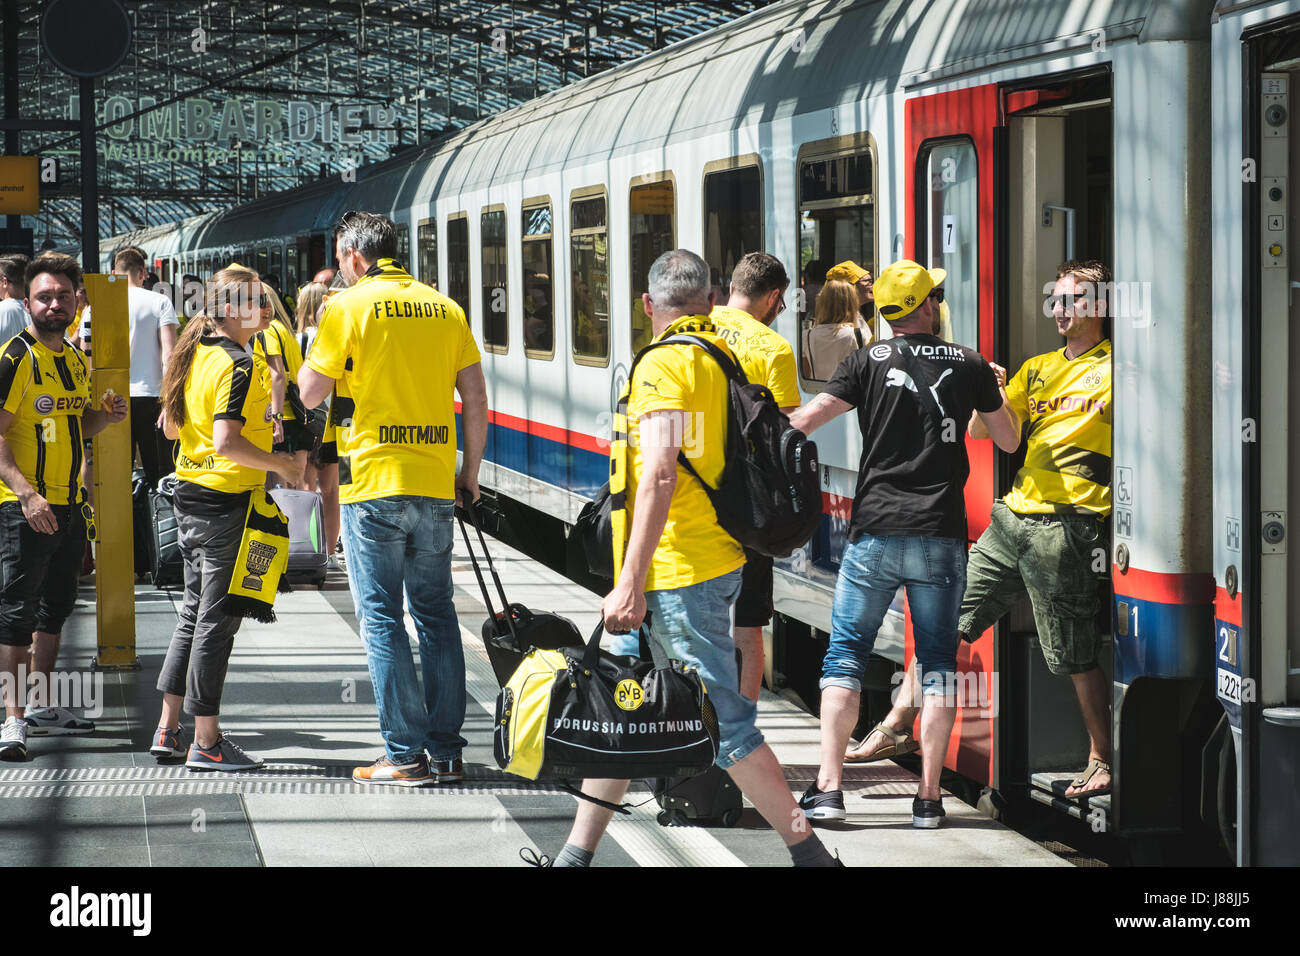 Berlin, Germany - may 27, 2017: BVB Fans / Borussia Dortmund Fans arriving on train station in Berlin on the day of the DFB-Pokal final. Stock Photo